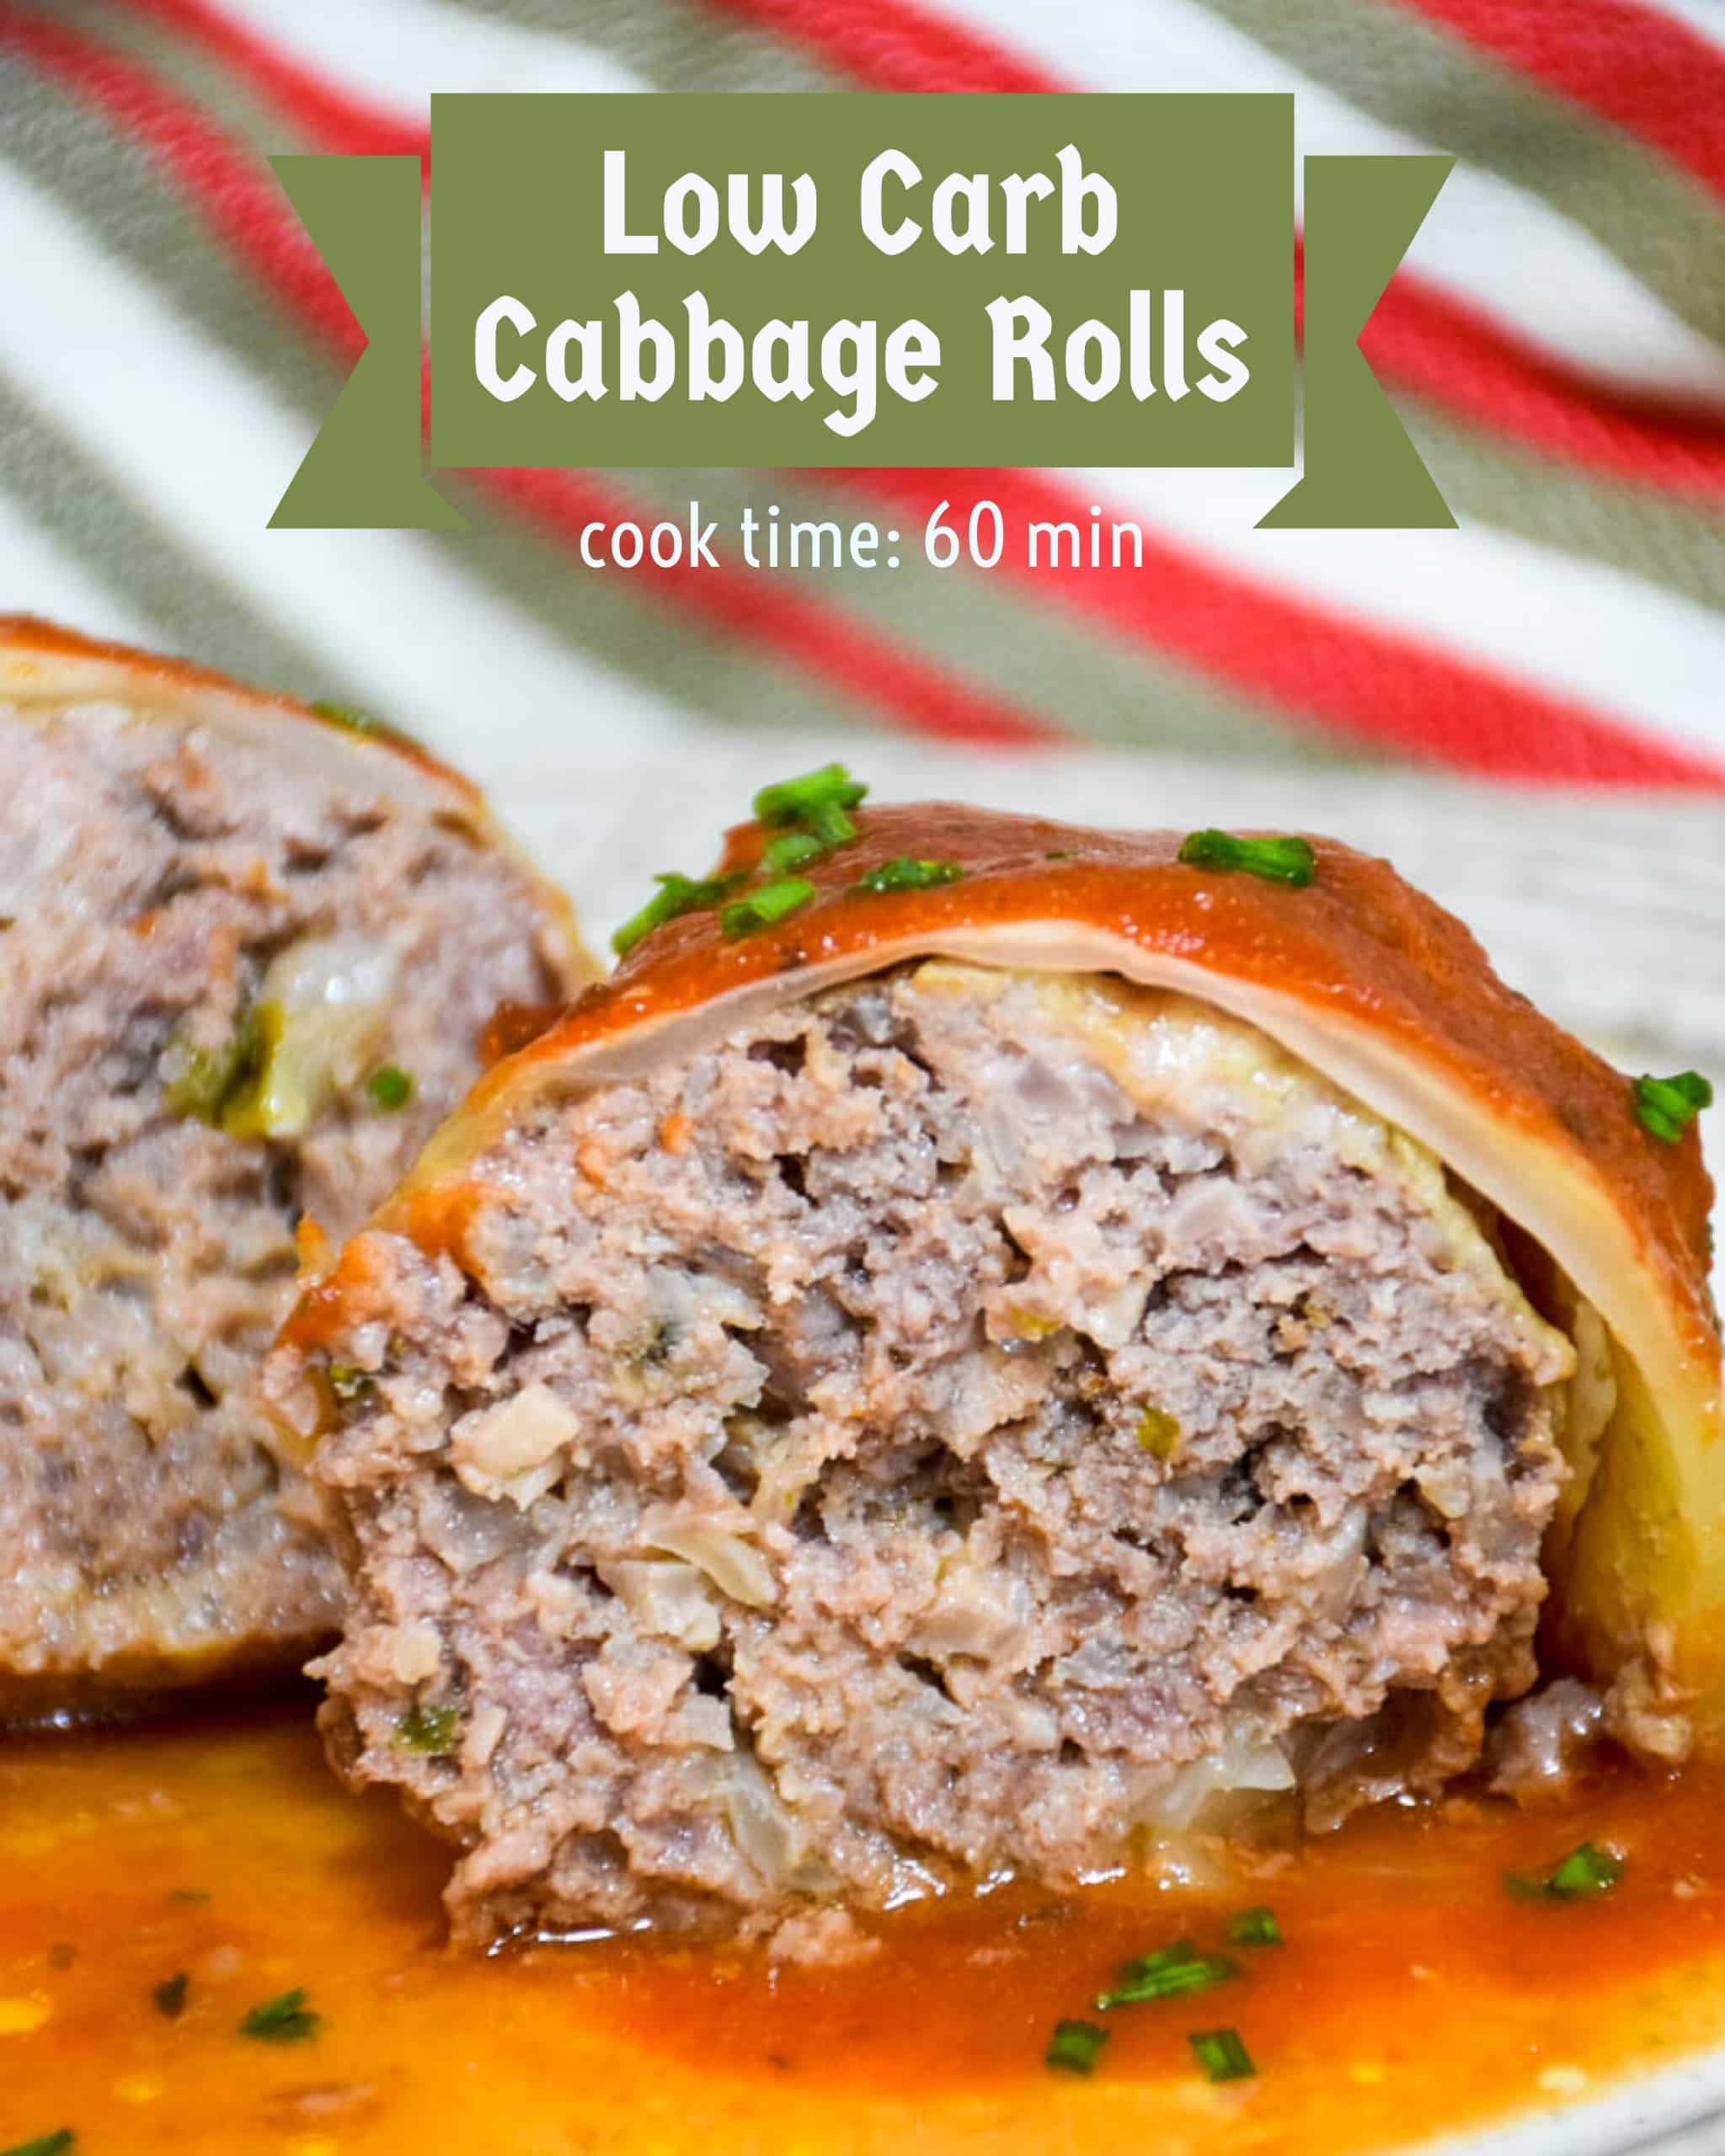 Low Carb Cabbage Rolls Best Of Cabbage Rolls Low Carb Keto Recipe Grumpy S Honeybunch